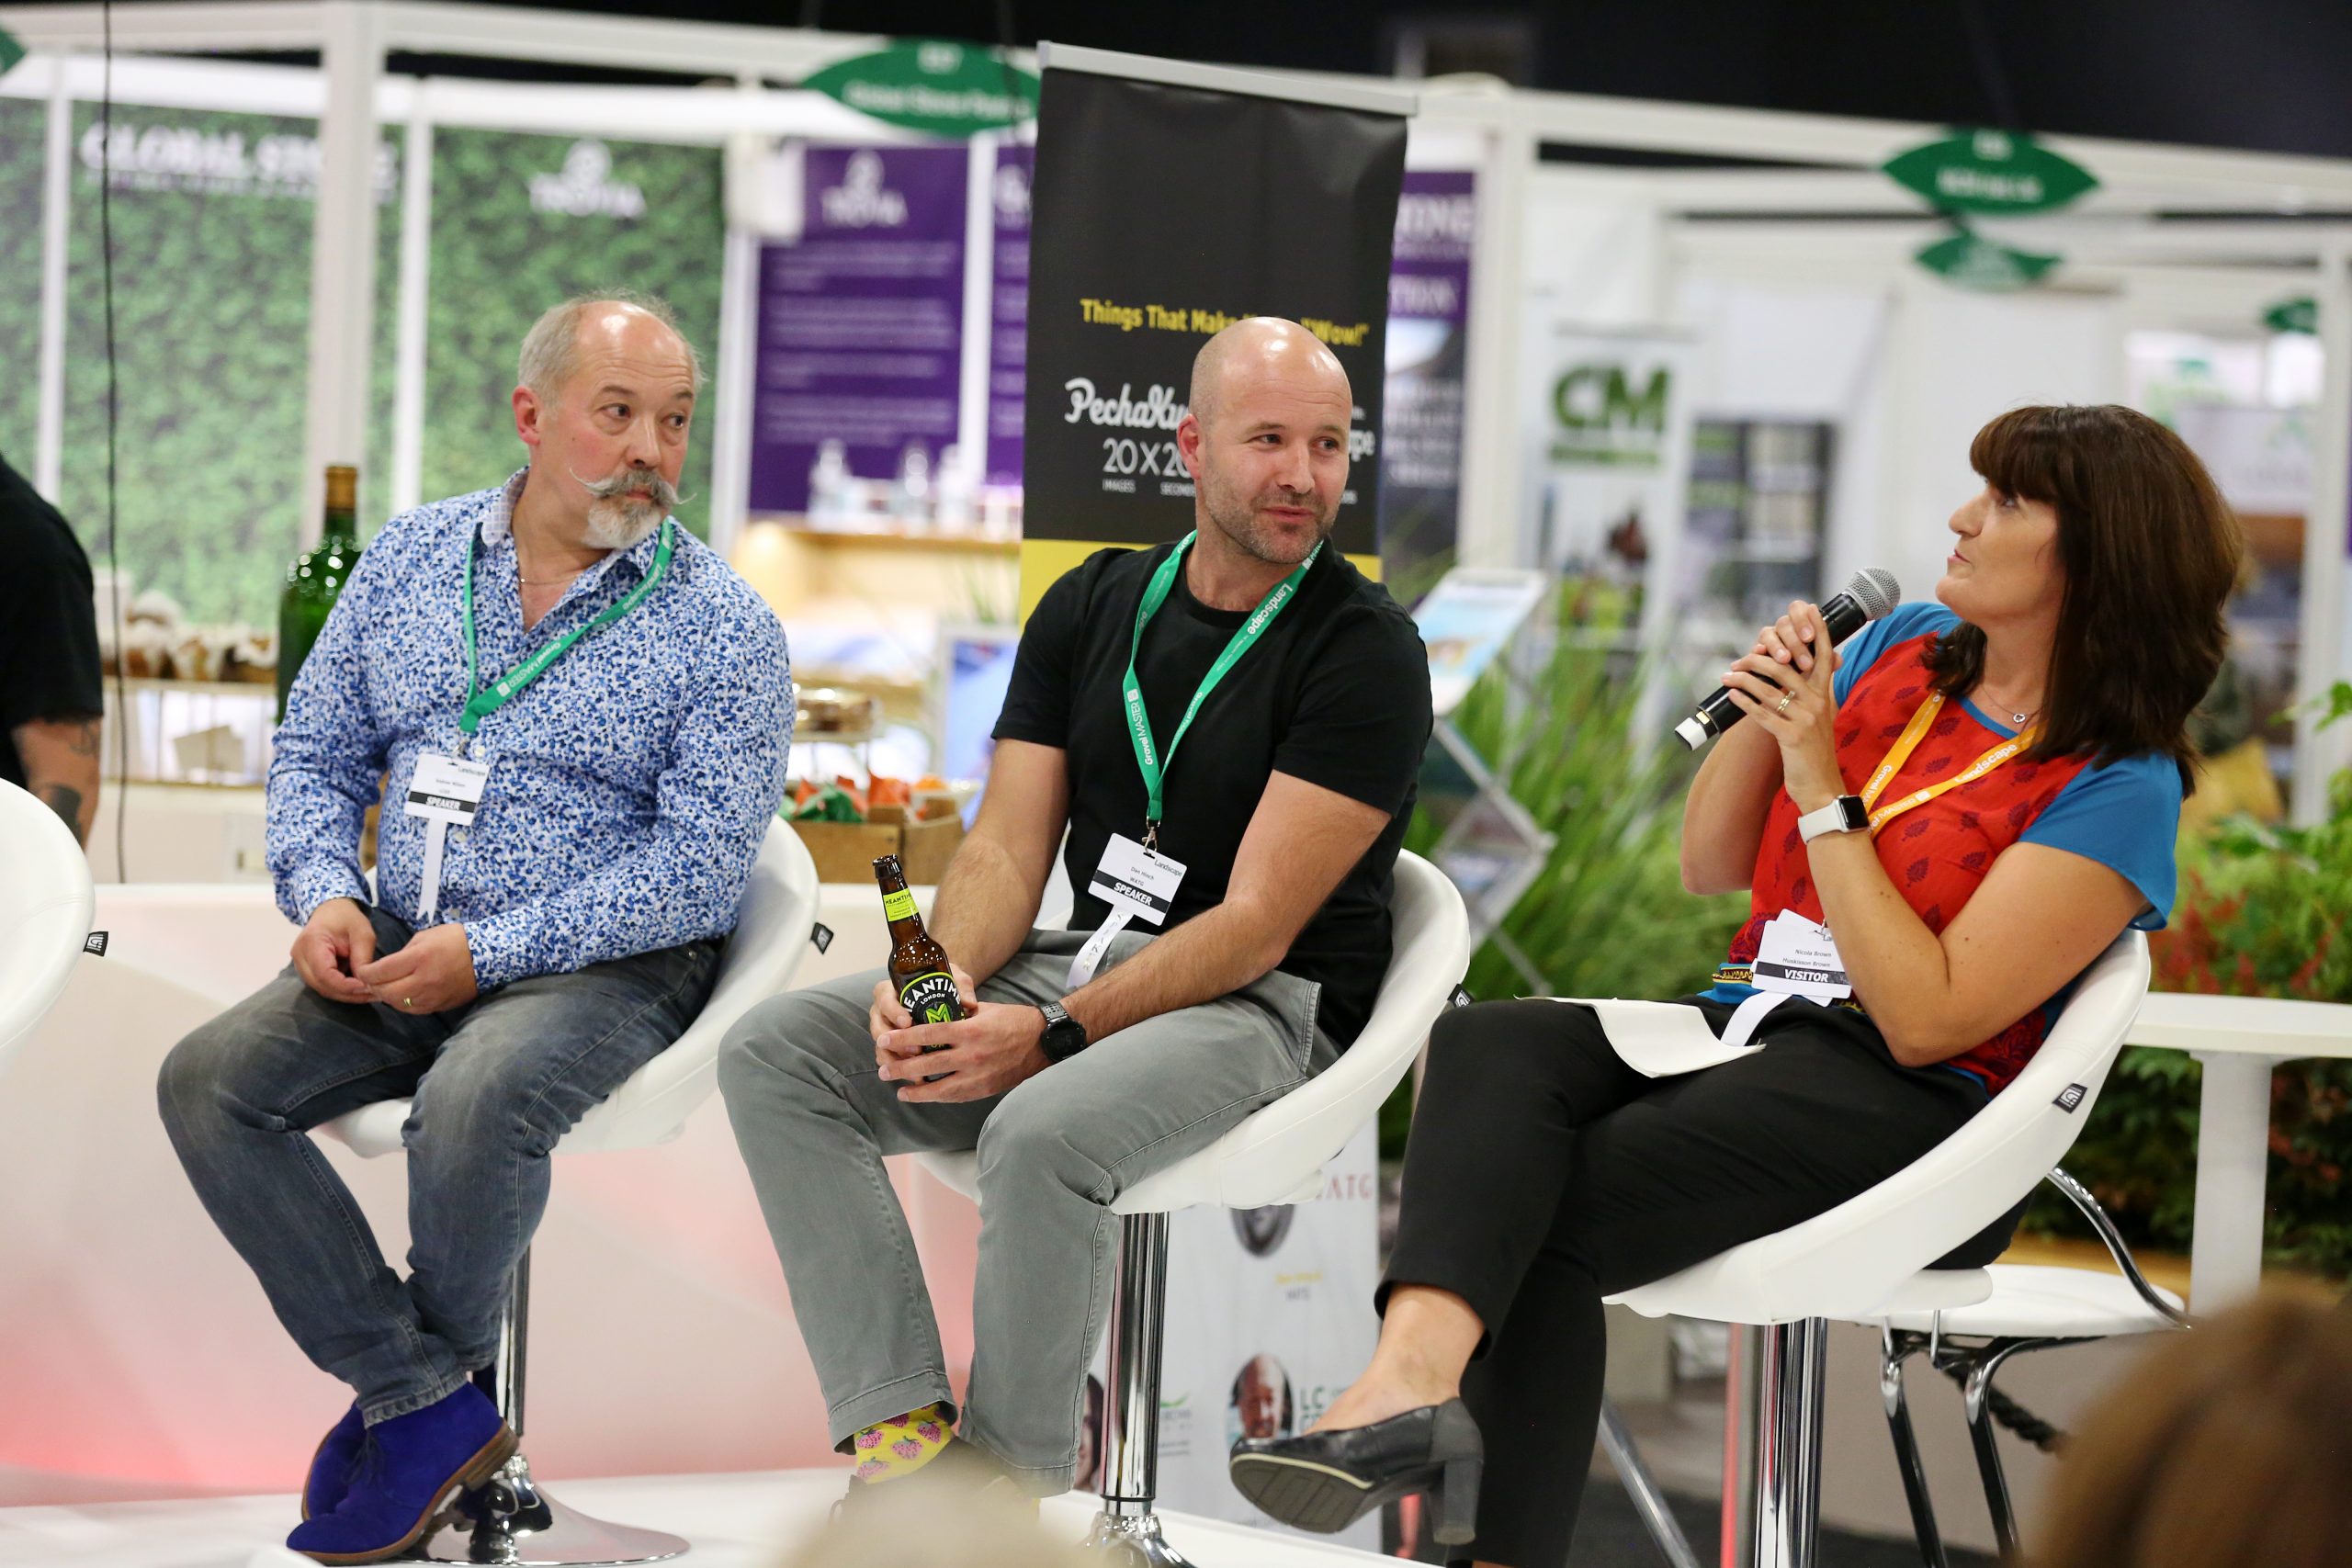 The Countdown to LANDSCAPE 2021 is on. The UK’s premier landscaping exhibition is less than a month away – have you registered yet? @LandscapeEvent